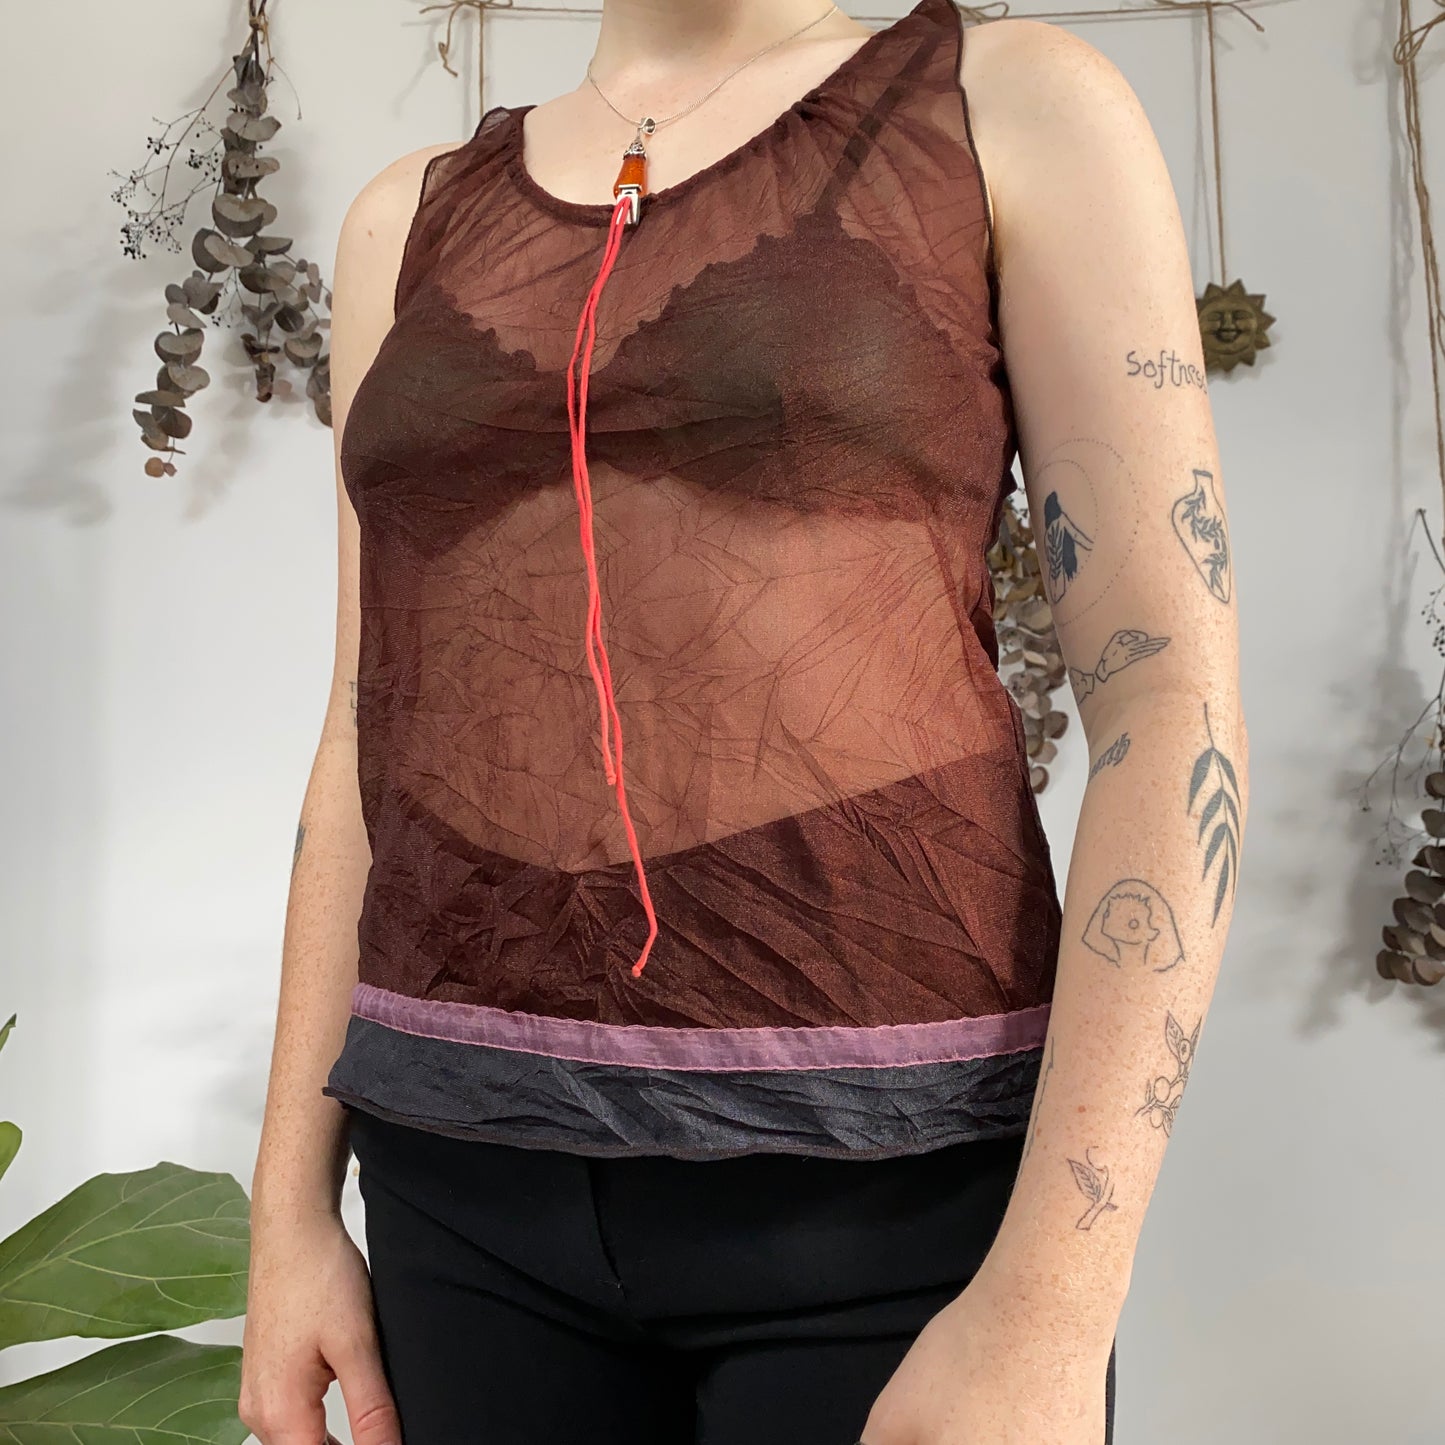 Sheer top - size M